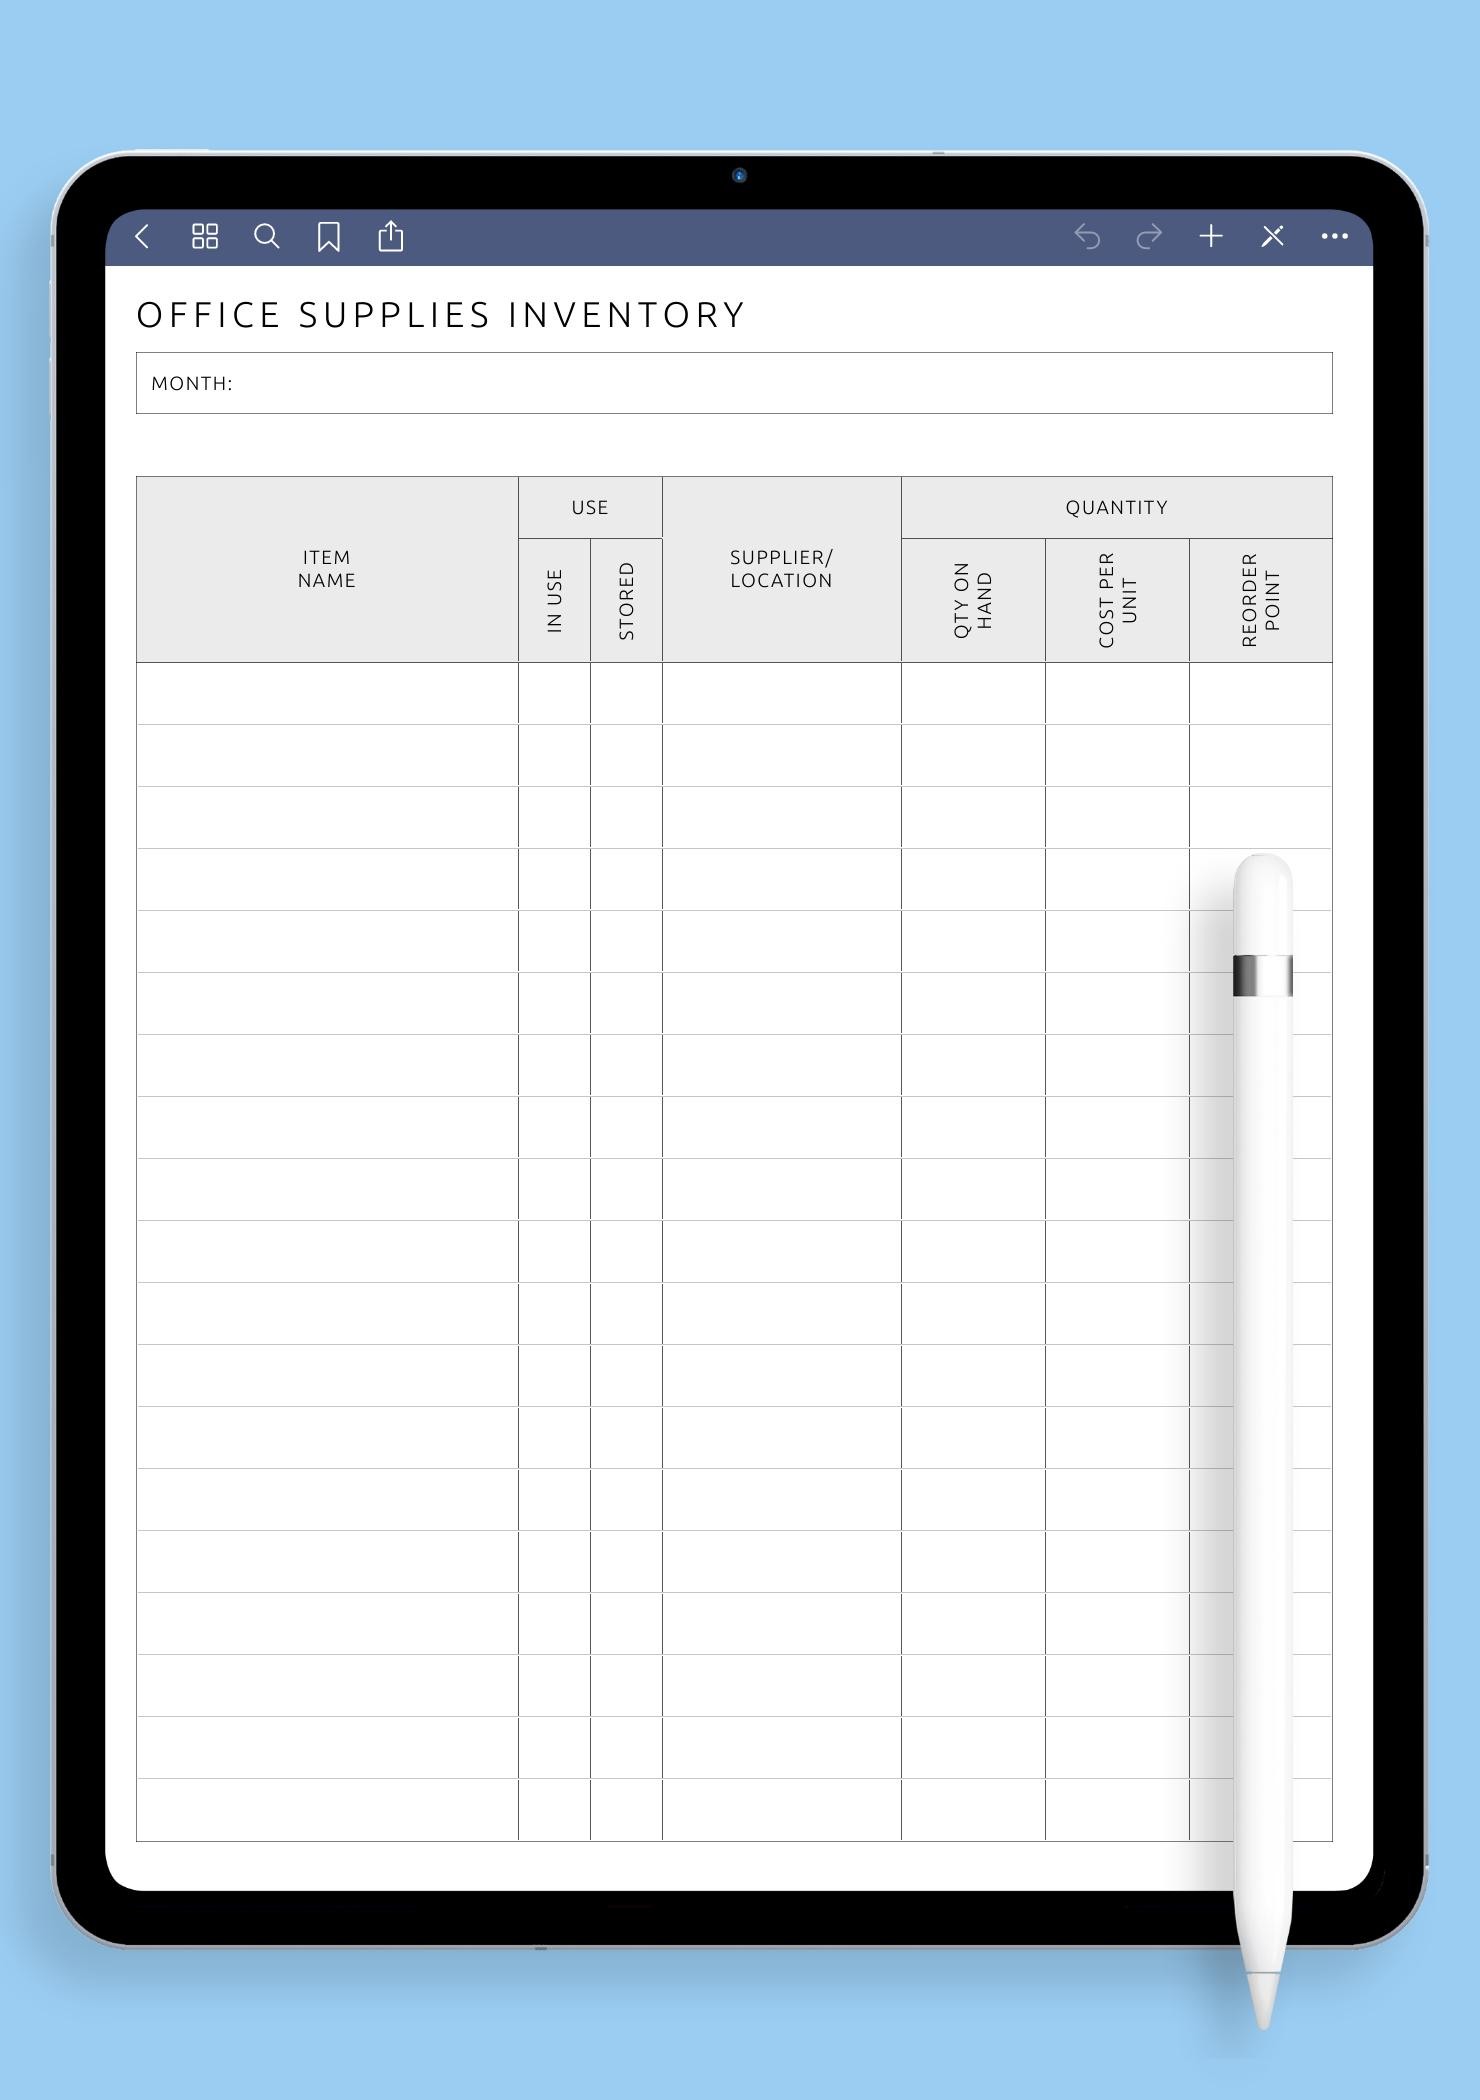 Office Supplies Inventory Template in Excel